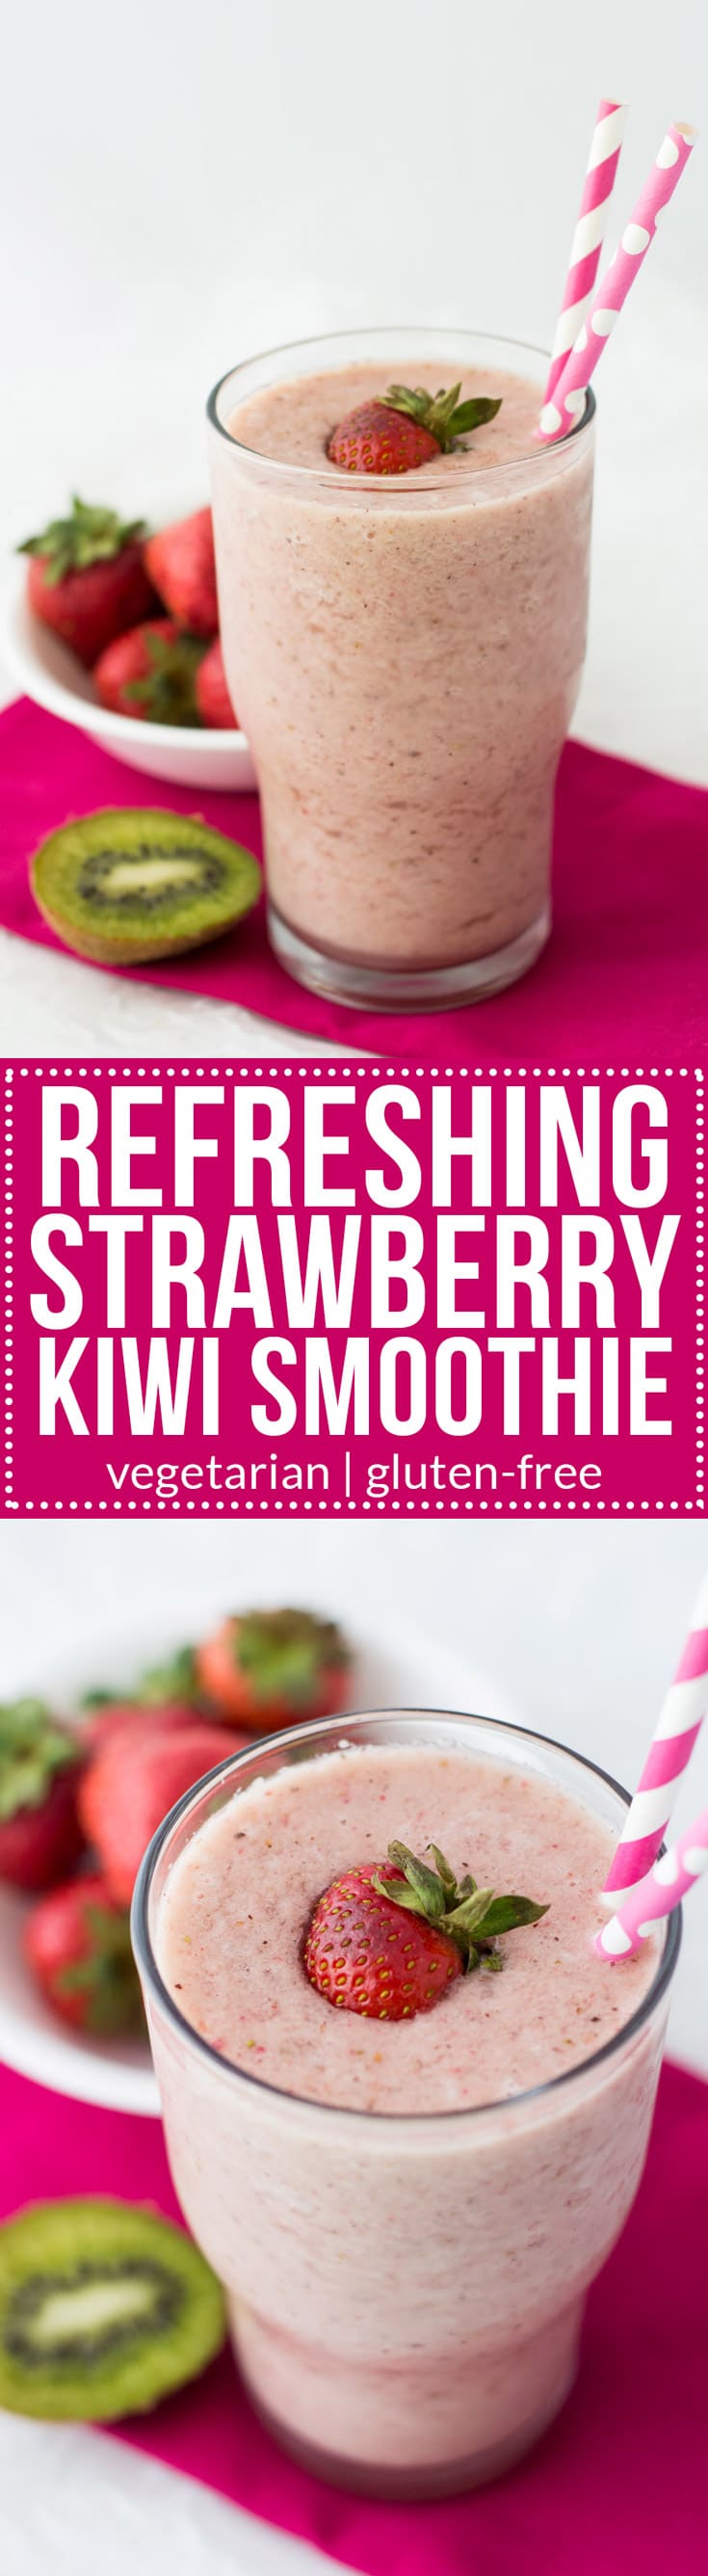 This sweet and tart Strawberry Kiwi Smoothie is the perfect breakfast or post-workout drink. It's full of vitamin C and antioxidants and low on calories!